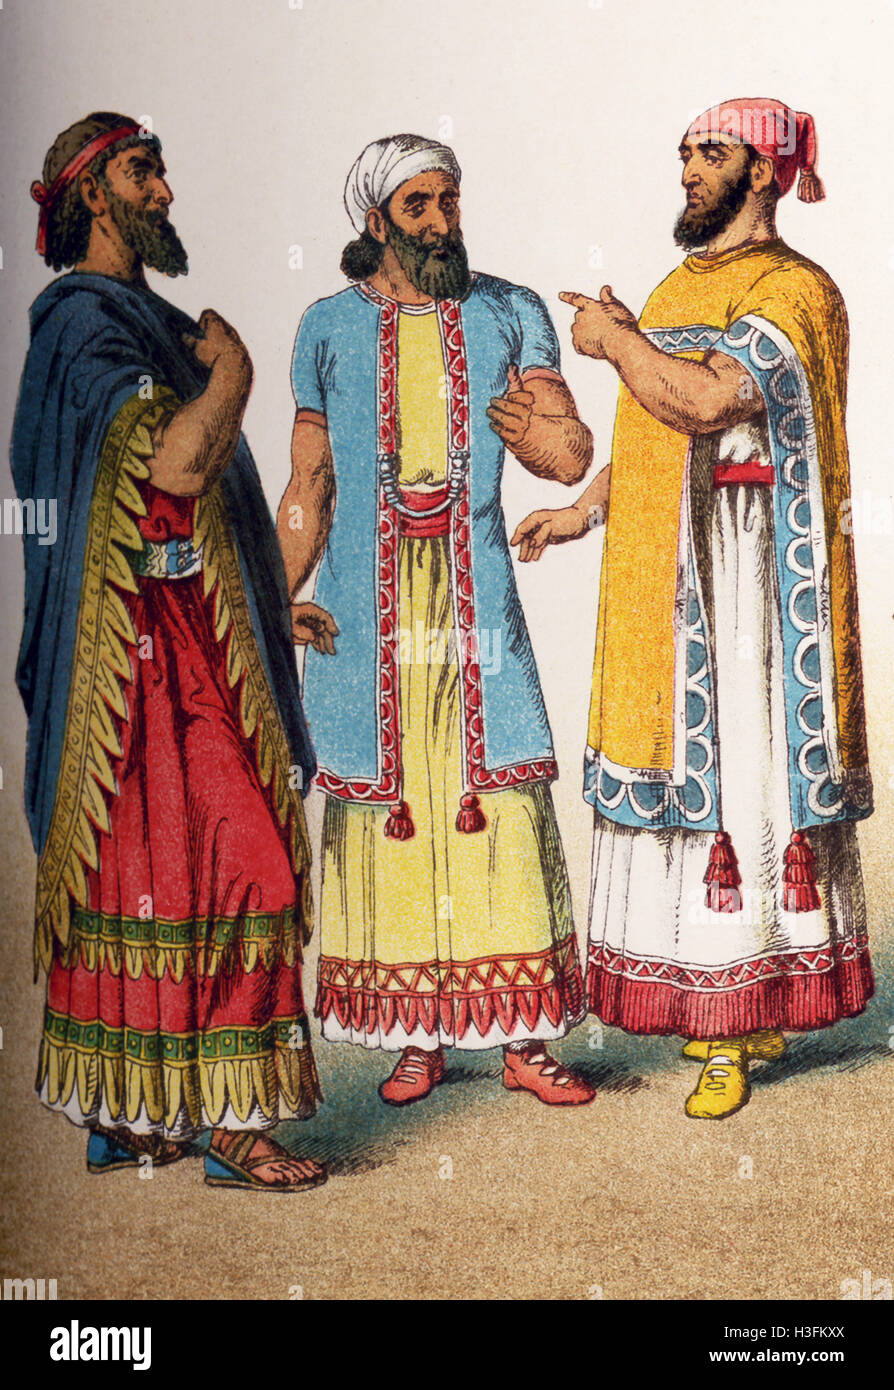 The figures illustrated here are three Hebrew figures from the ancient Middle East. The illustration dates to 1882. Stock Photo